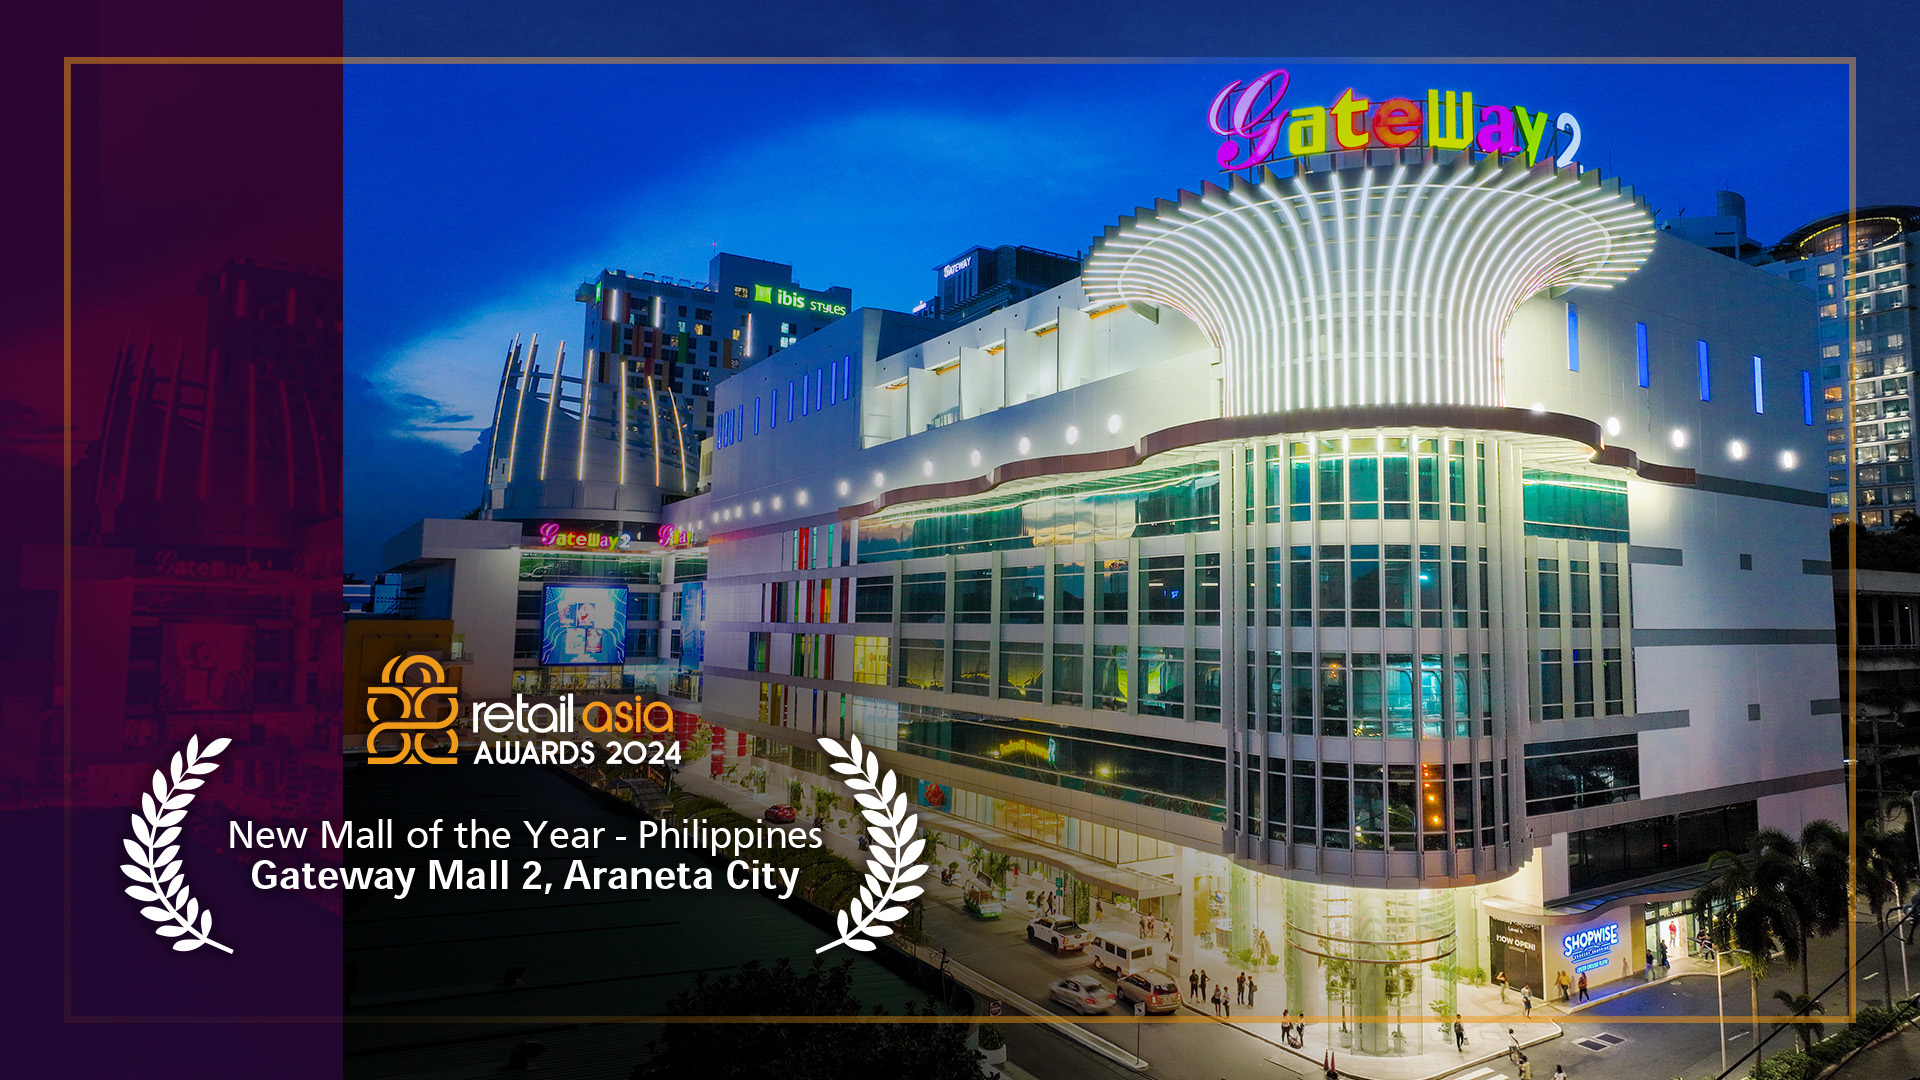 Araneta City’s Gateway Mall 2 wins New Mall of the Year &#8211; Philippines at Retail Asia Awards 2024